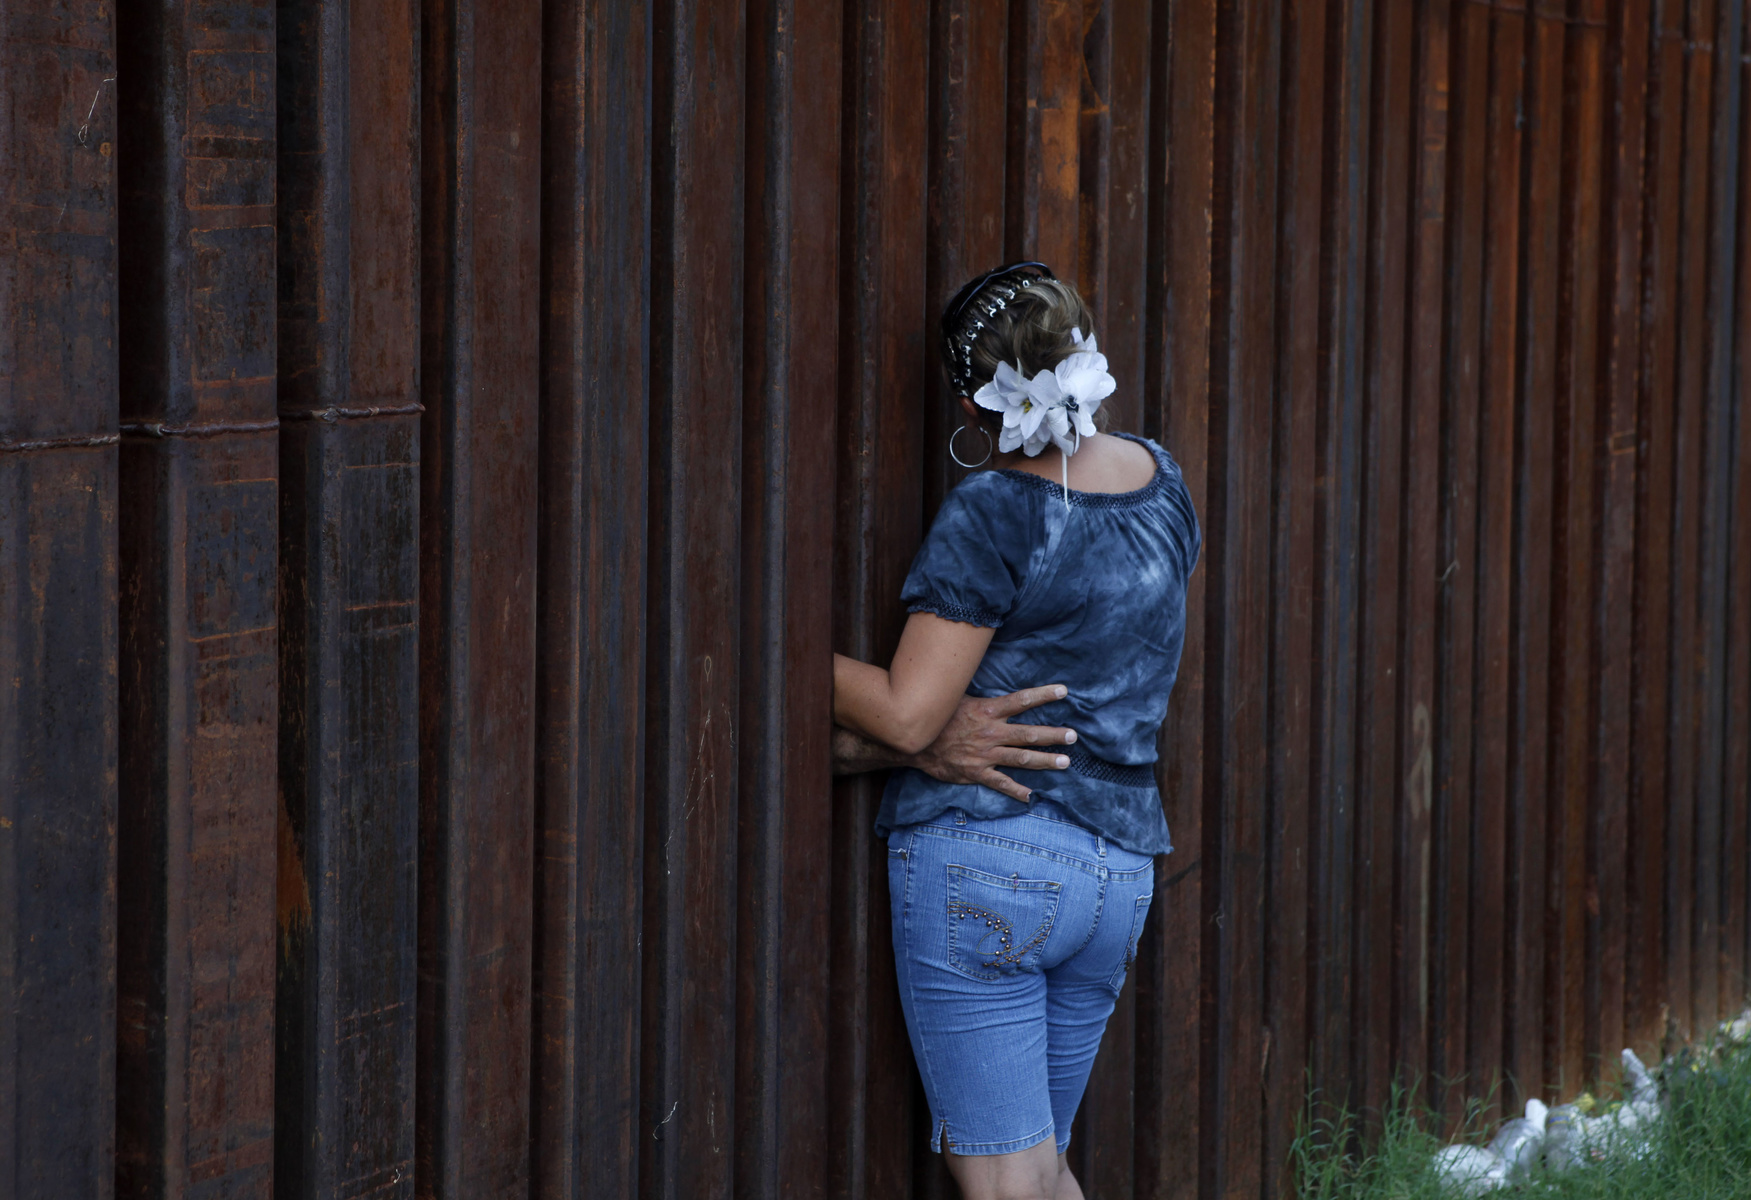 A woman, who declined to give her name, is hugged by her husband as they chat between the border fence separating Nogales, Ariz., and Nogales, Sonora, Mexico, Wednesday, July 28, 2010. A federal judge on Wednesday blocked the most controversial parts of Arizona's immigration law from taking effect, delivering a last-minute victory to opponents of the crackdown. The overall law will still take effect Thursday, but without the provisions that angered opponents — including sections that required officers to check a person's immigration status while enforcing other laws. (AP Photo/Jae C. Hong)